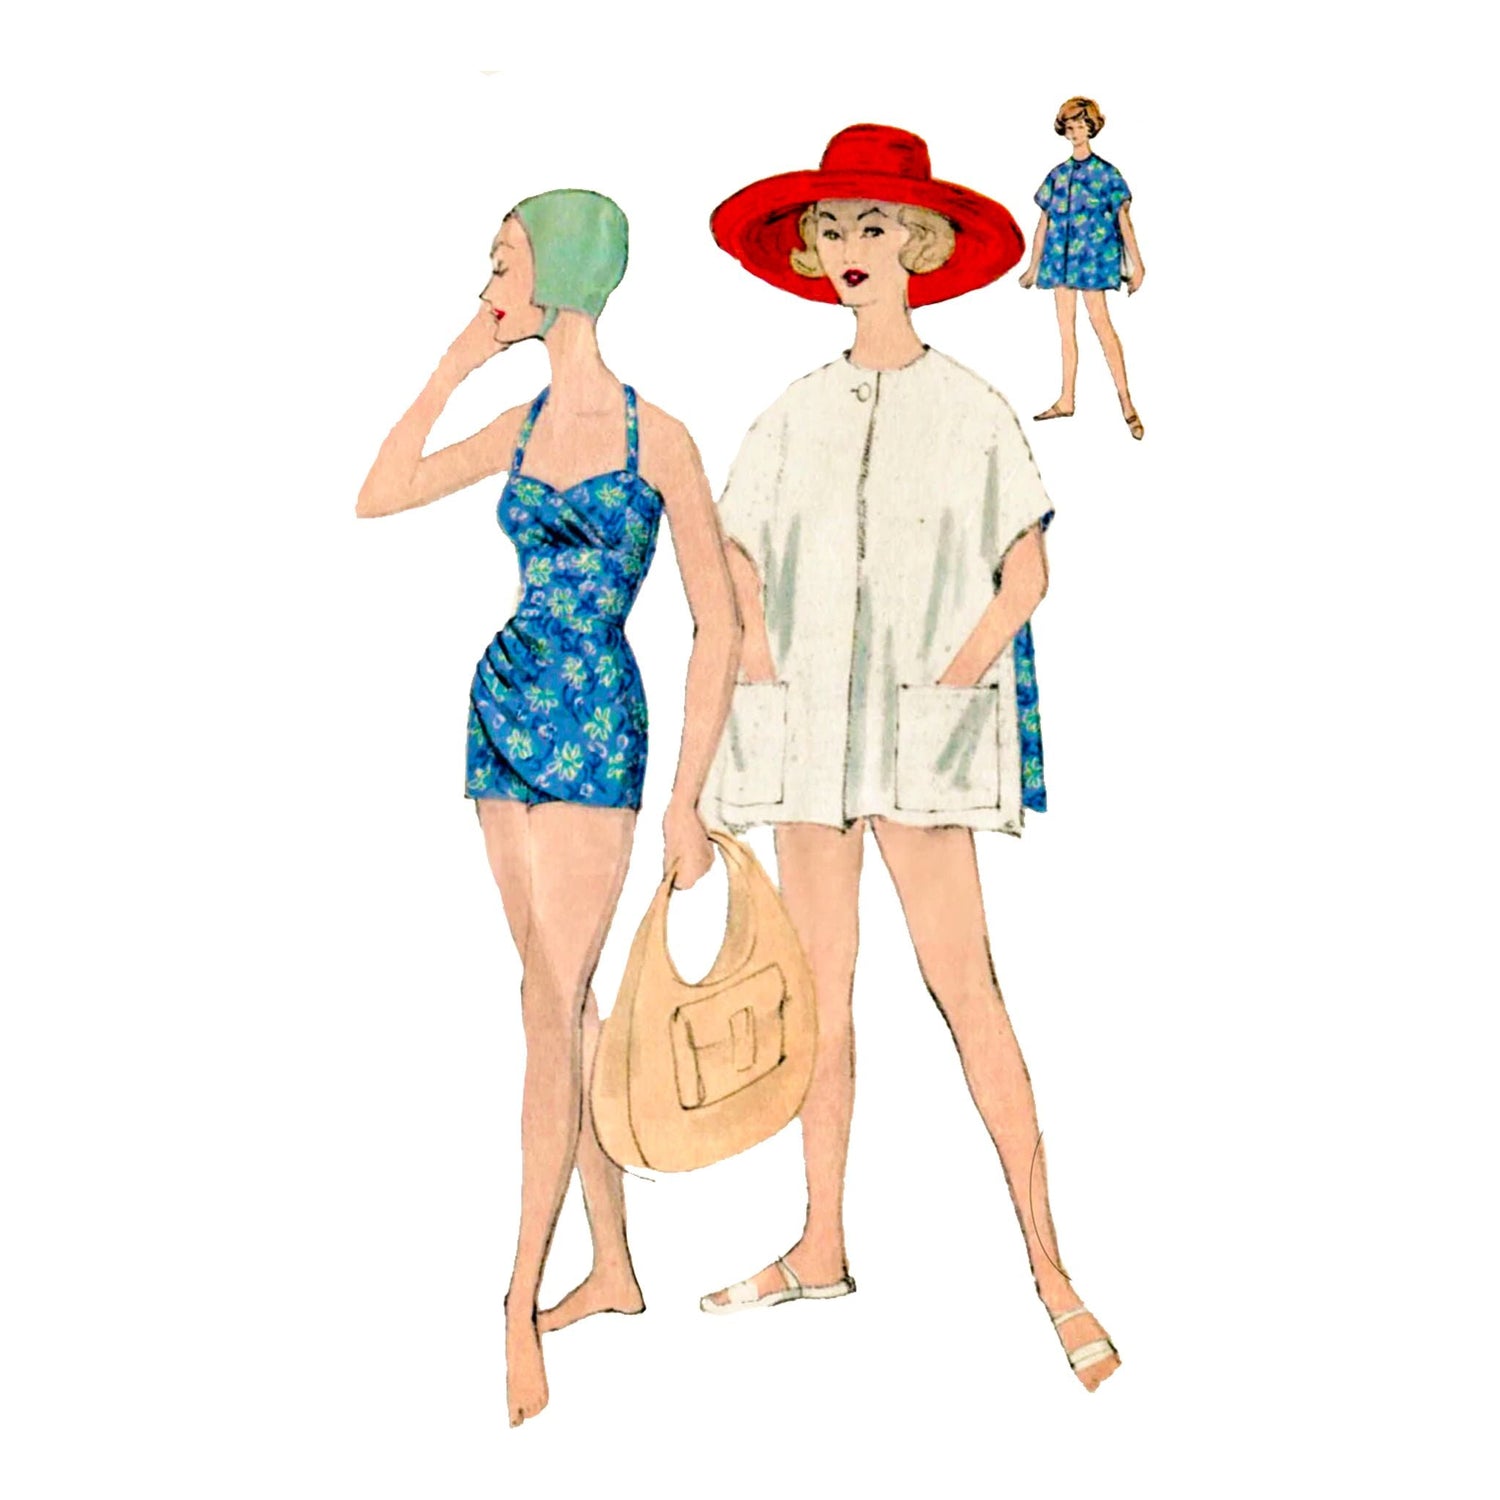 Model wearing bathing suit and reversible beach coat made from Vogue 9749 pattern